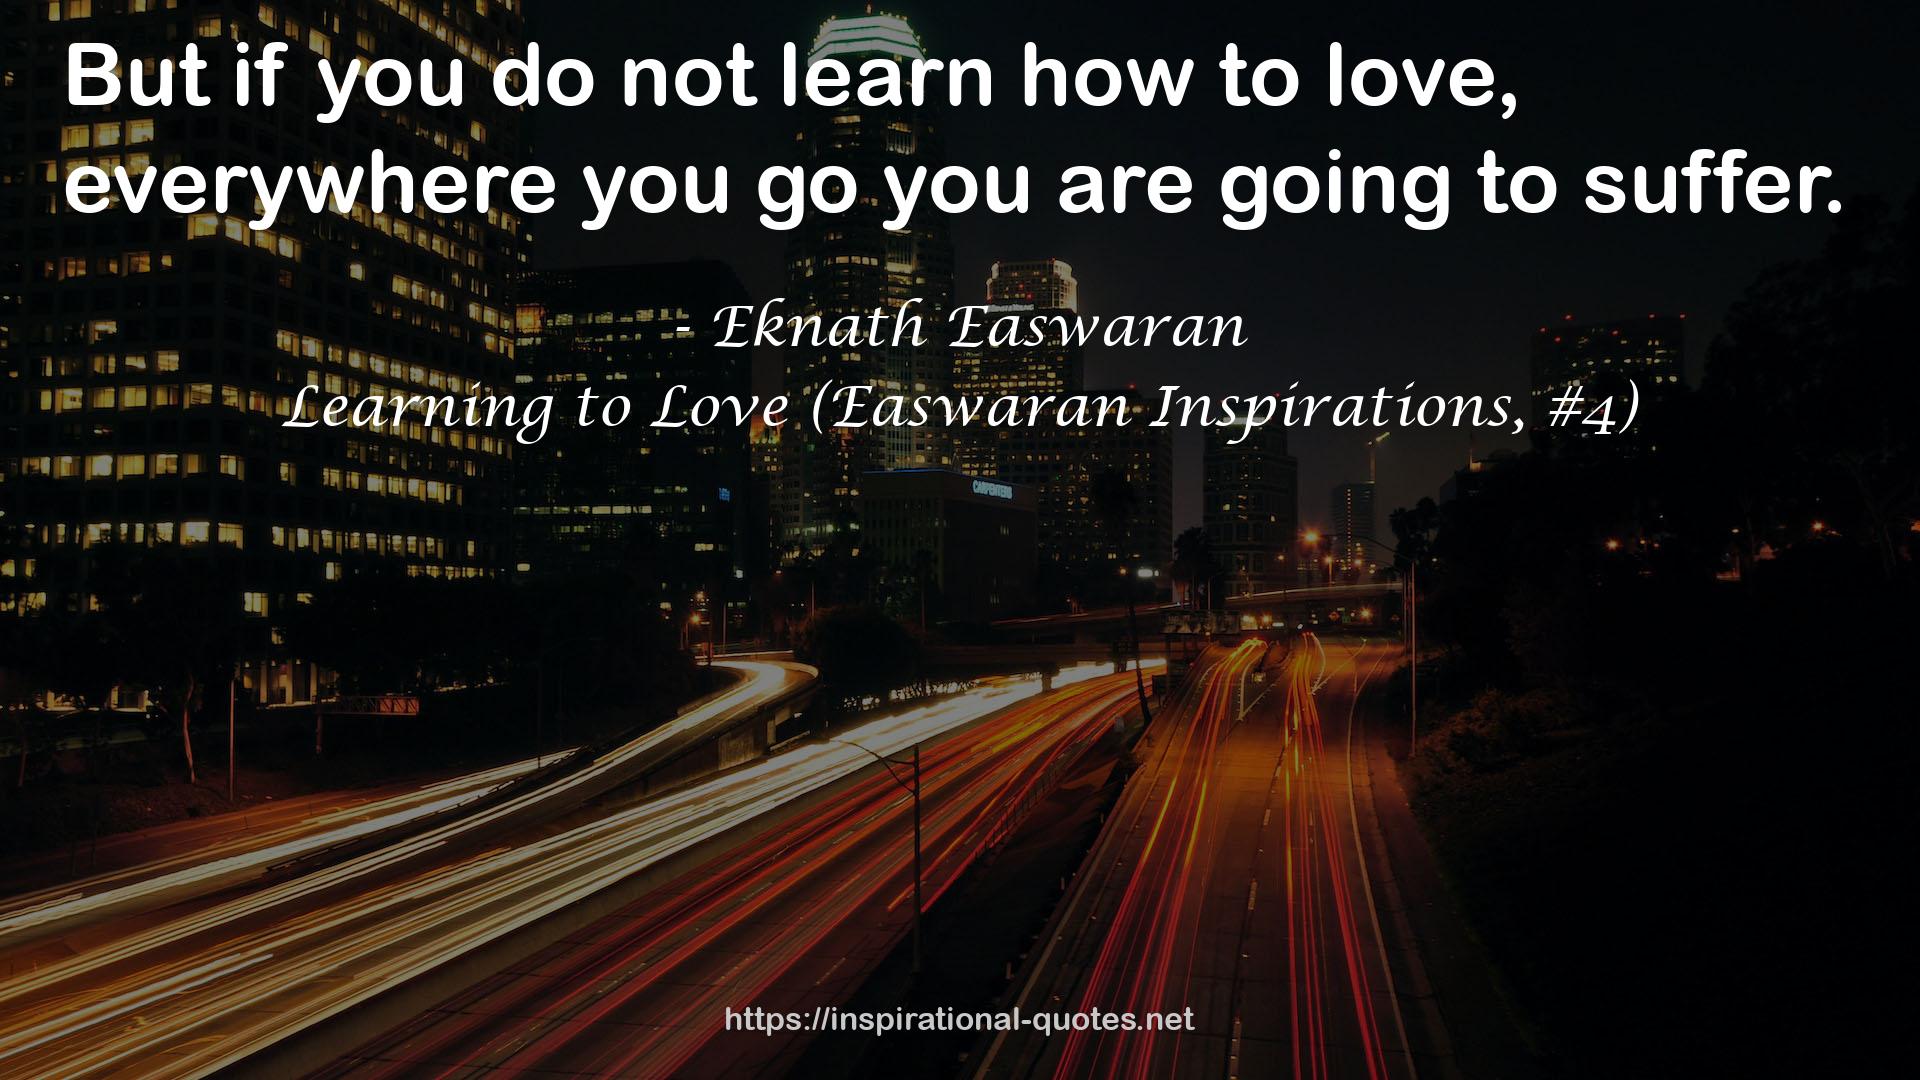 Learning to Love (Easwaran Inspirations, #4) QUOTES